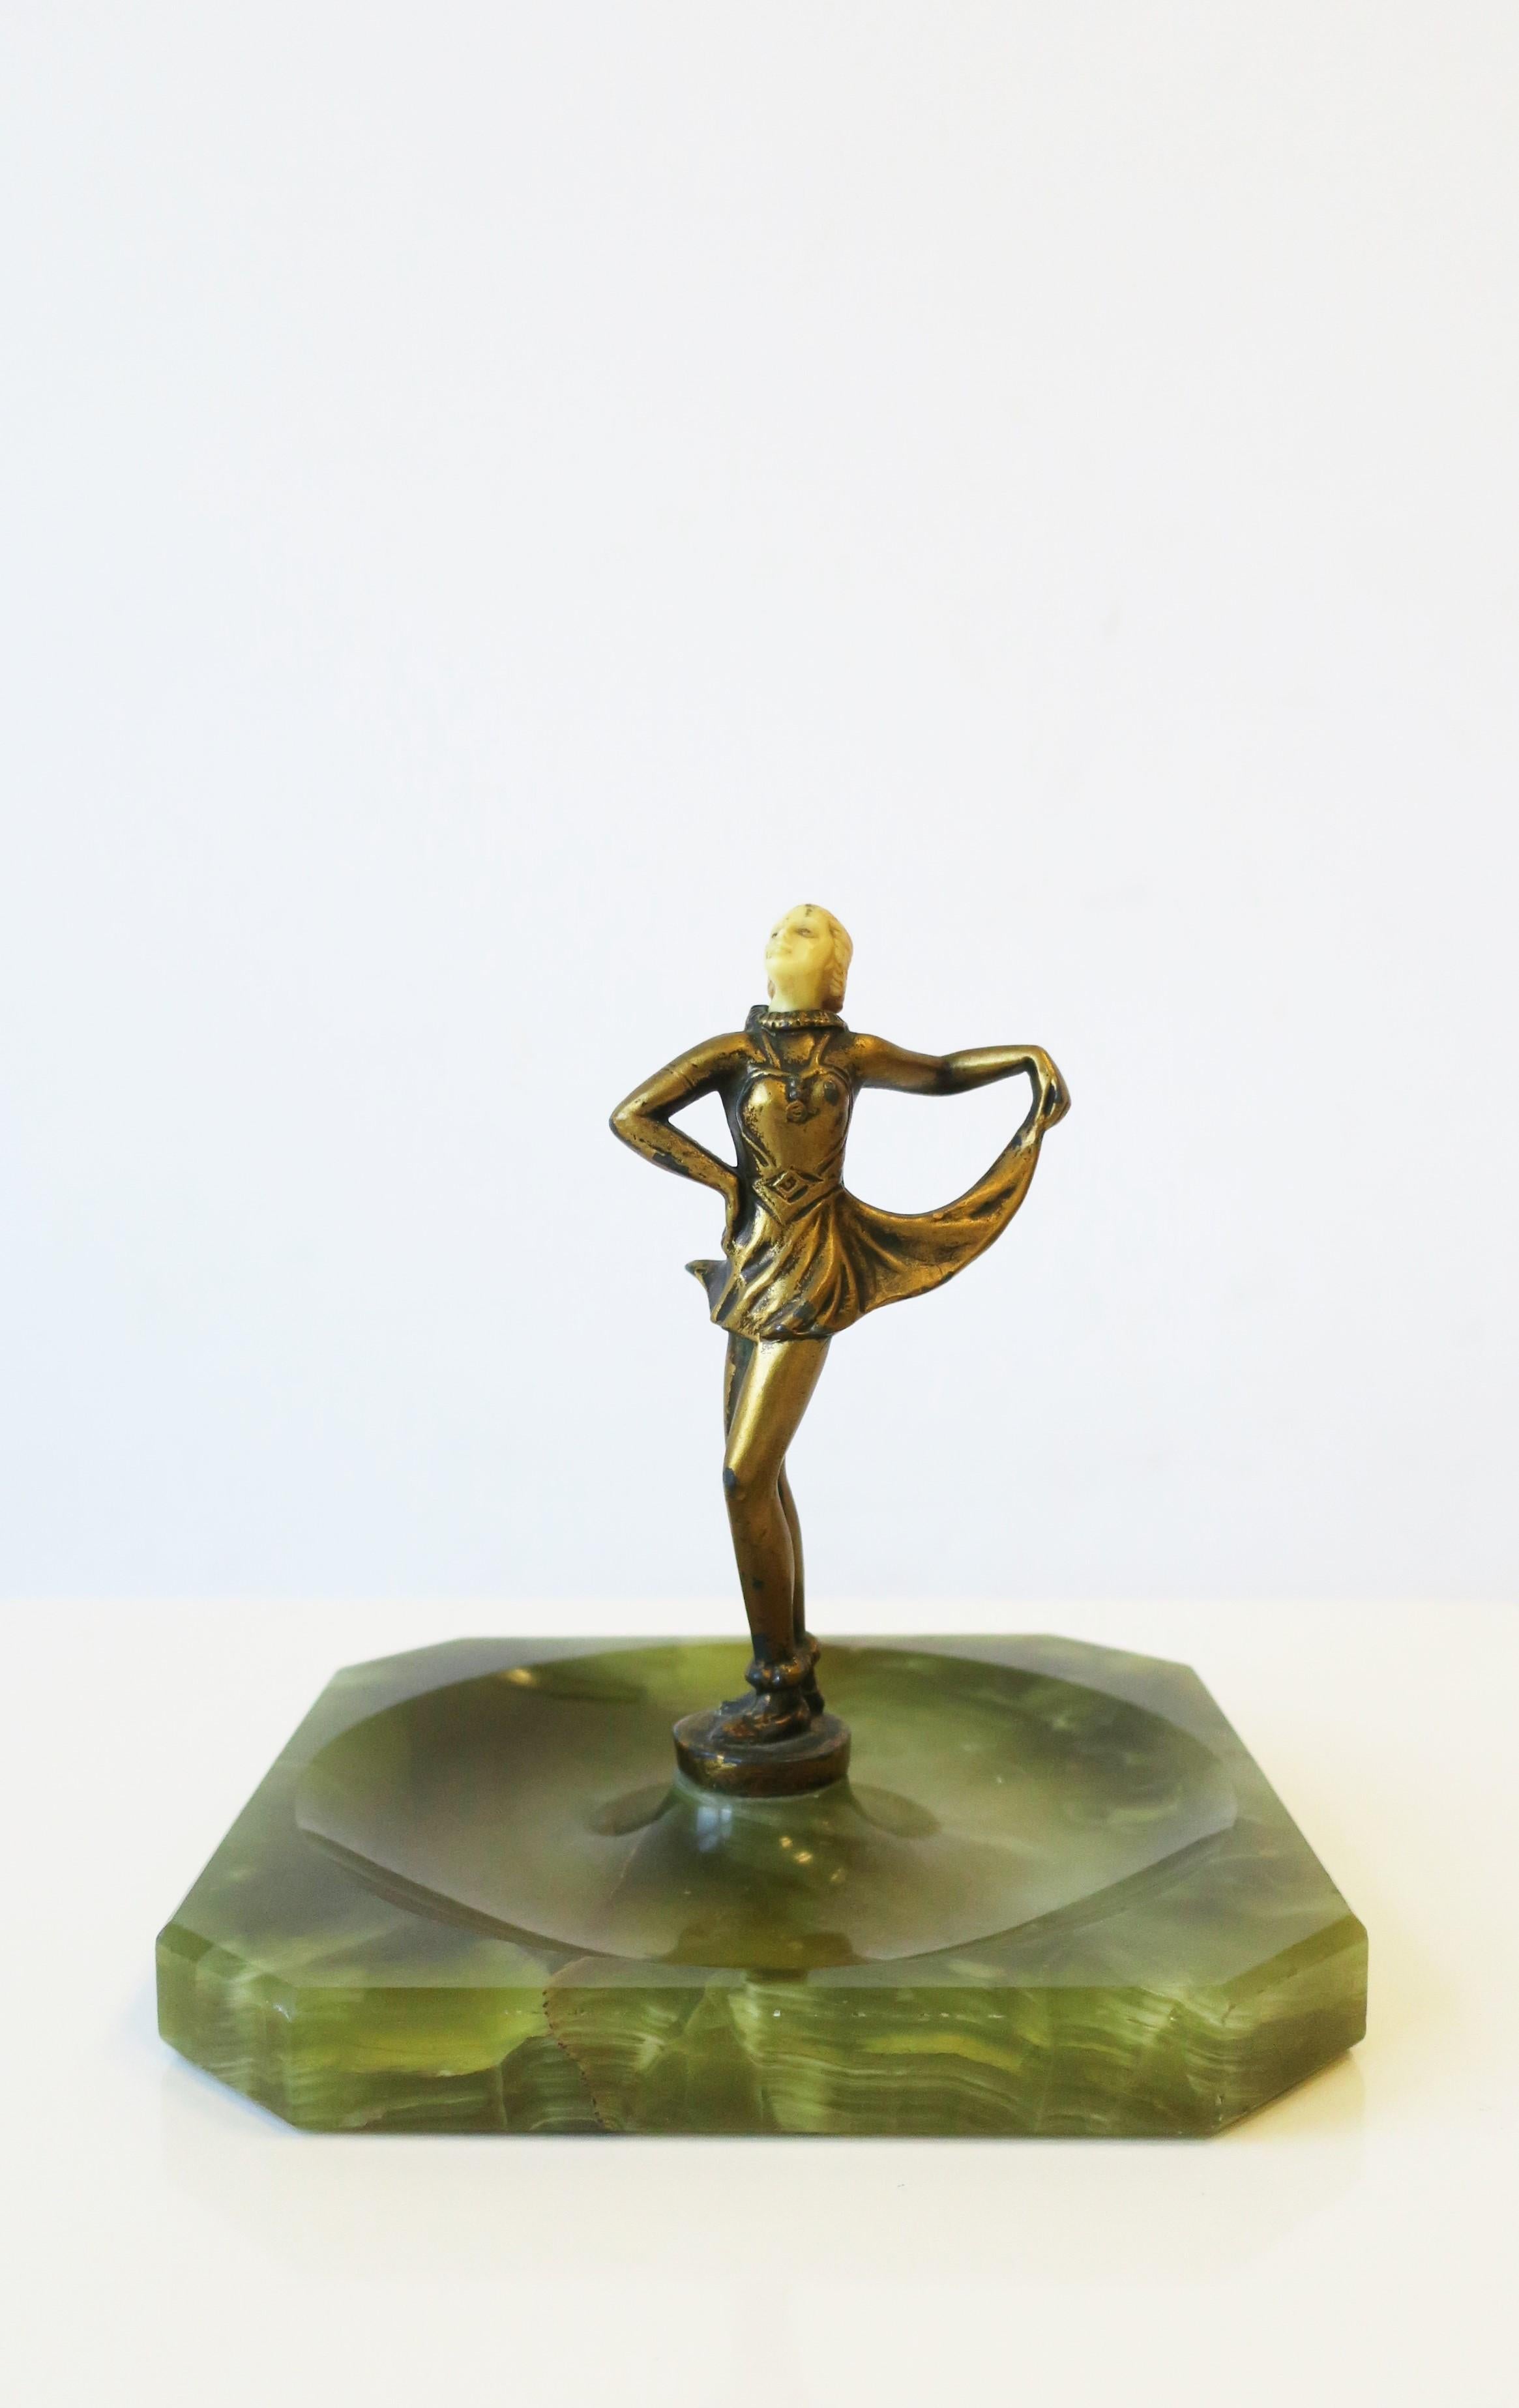 A brass female dancer sculpture and green onyx marble base vide-poche catchall, Art Deco period, circa early-20th century. Sculpture's head is resin and body with a gold overlay on brass, finished with a green onyx marble base. Great as a standalone